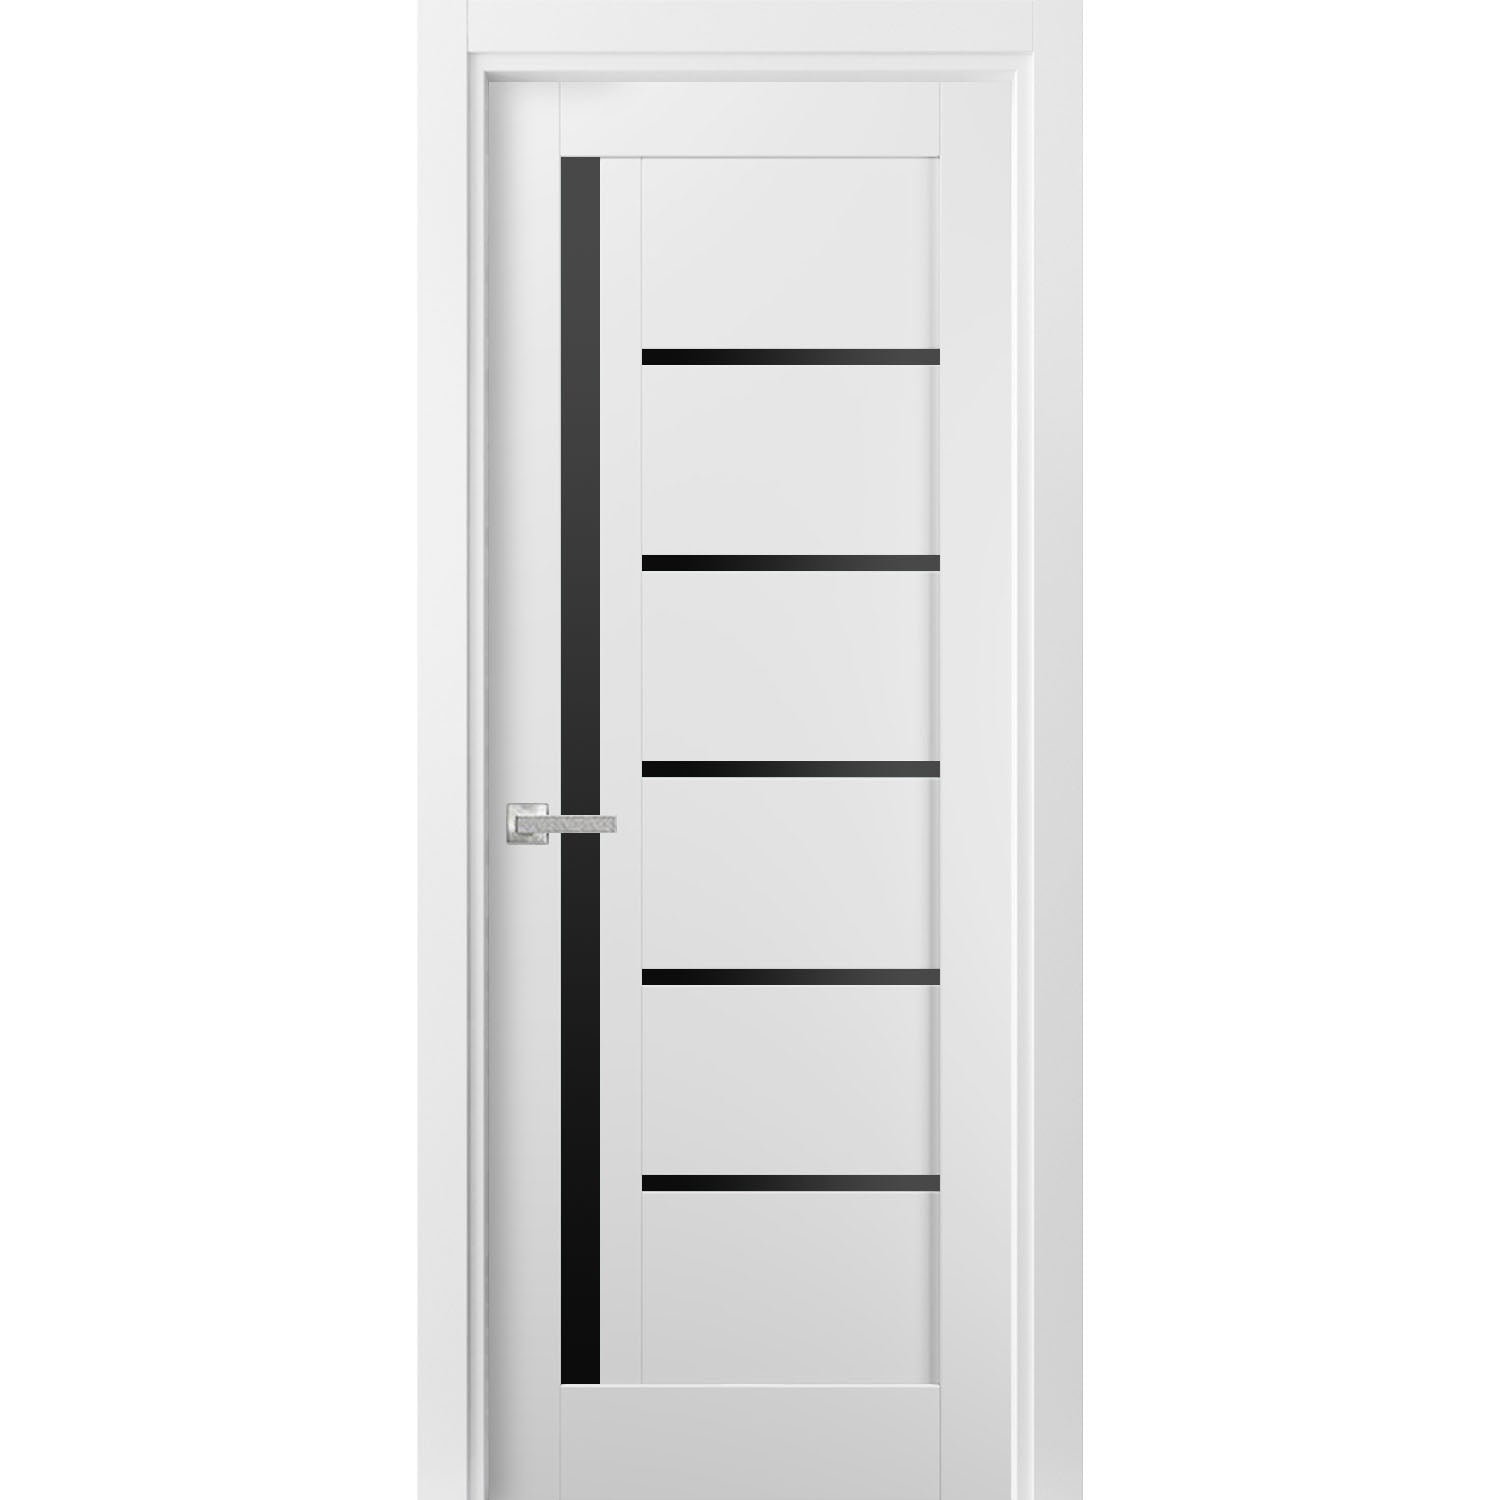 SARTODOORS Paneled Solid Manufactured Wood Unfinished Quadro Standard ...